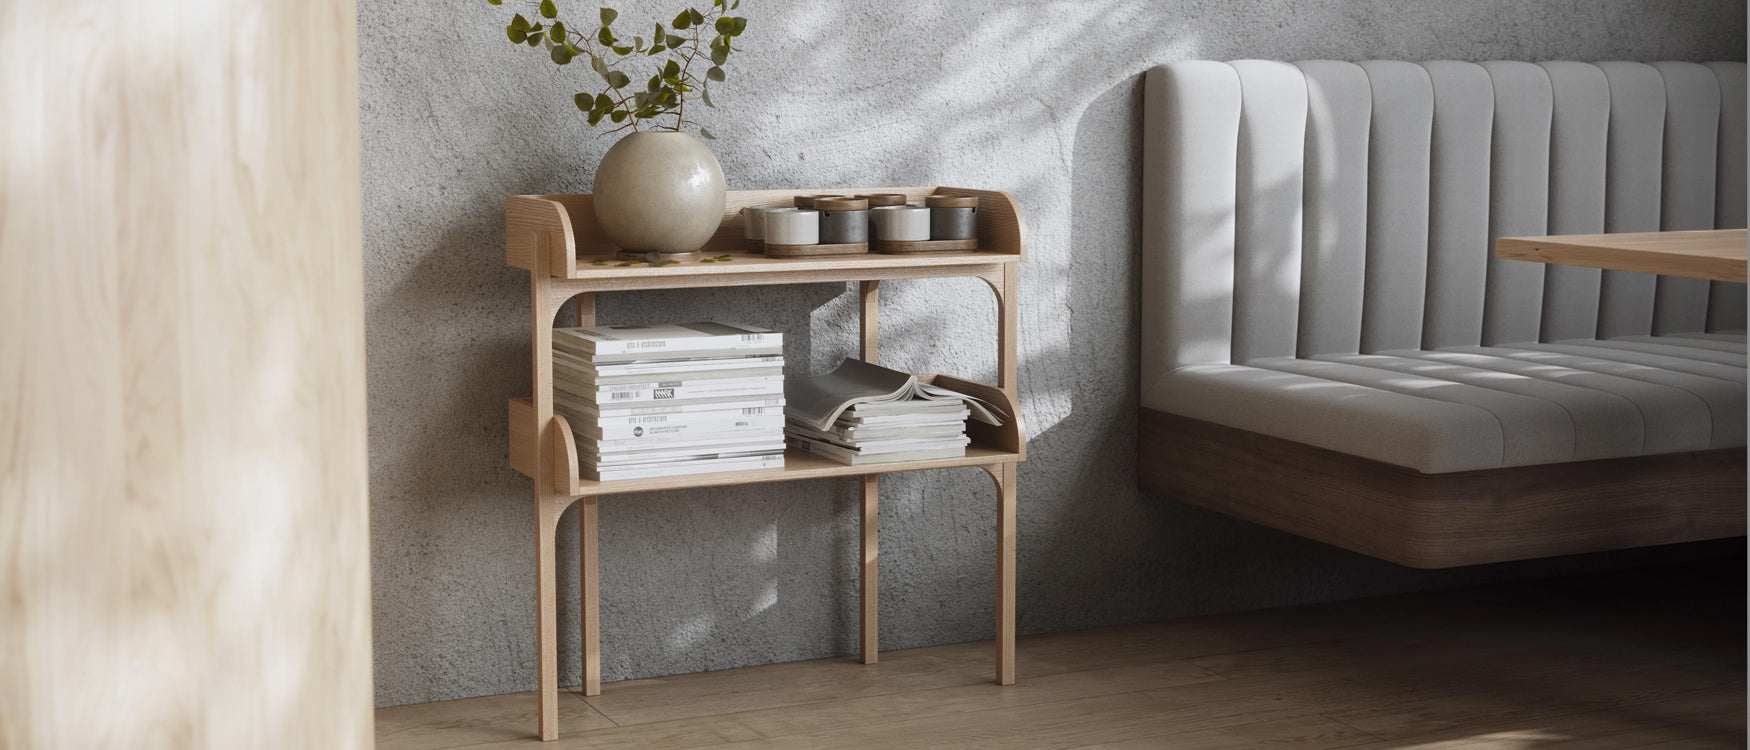 Woud is a danish design brand with a drive to create new originals.